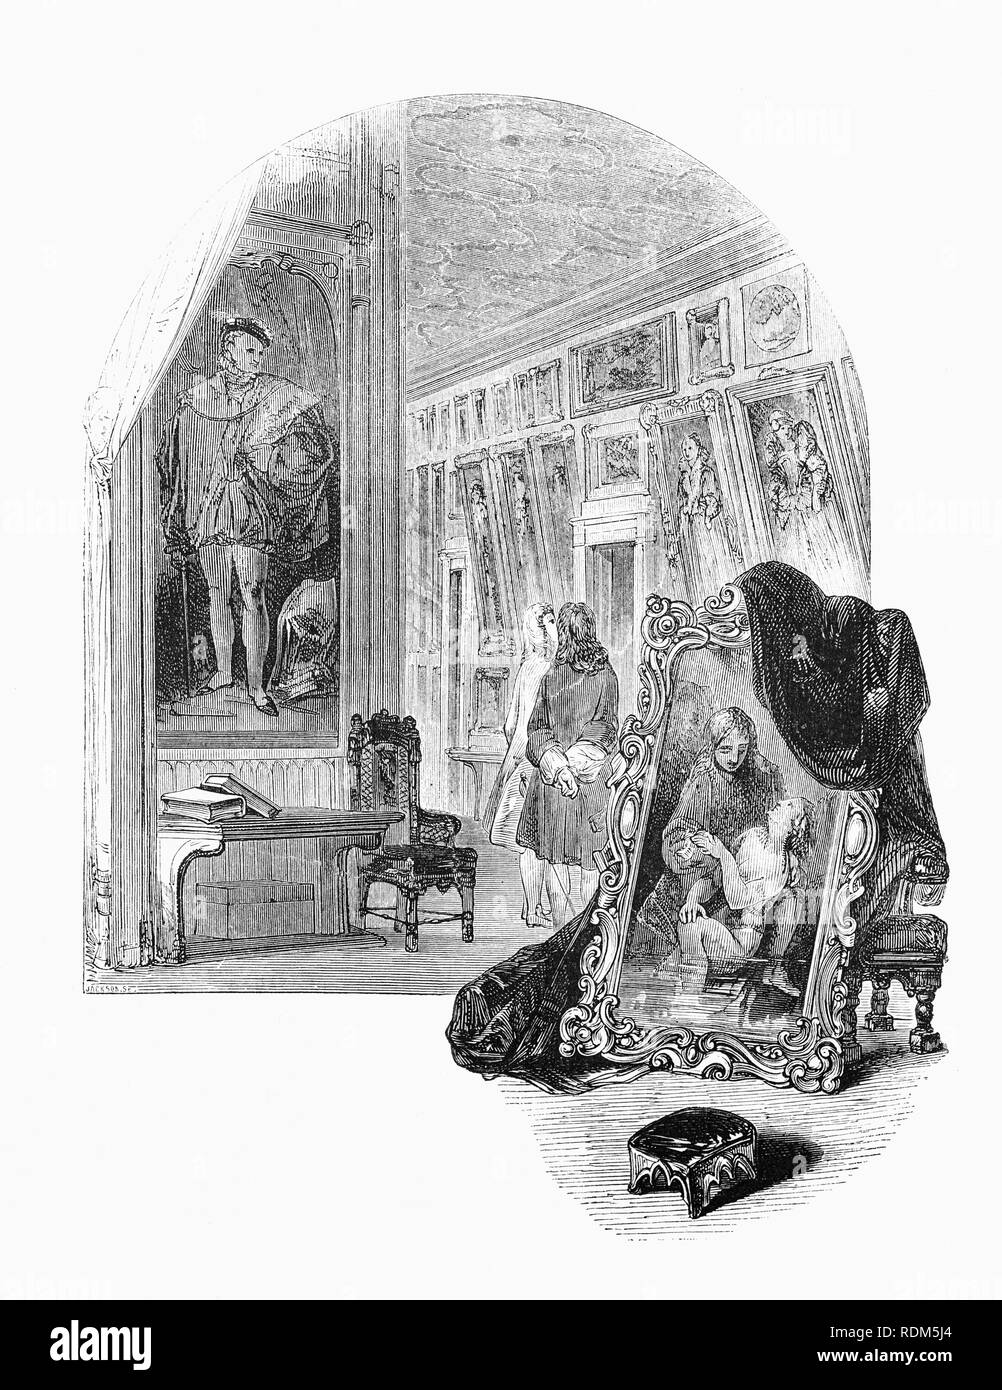 Sir Roger de Coverley, the fictional character, devised by Joseph Addison, who portrayed him as the ostensible author of papers and letters that were published in Addison and Richard Steele’s influential periodical The Spectator. Seen here showing  the 'Spectator',  his ancestors in the picture Gallery, Sir Roger was a baronet of Worcestershire and represented a typical landed country gentleman. He was also a member of the fictitious Spectator Club, and the de Coverley writings included 18th-century English life that were often considered The Spectator’s best feature. Stock Photo